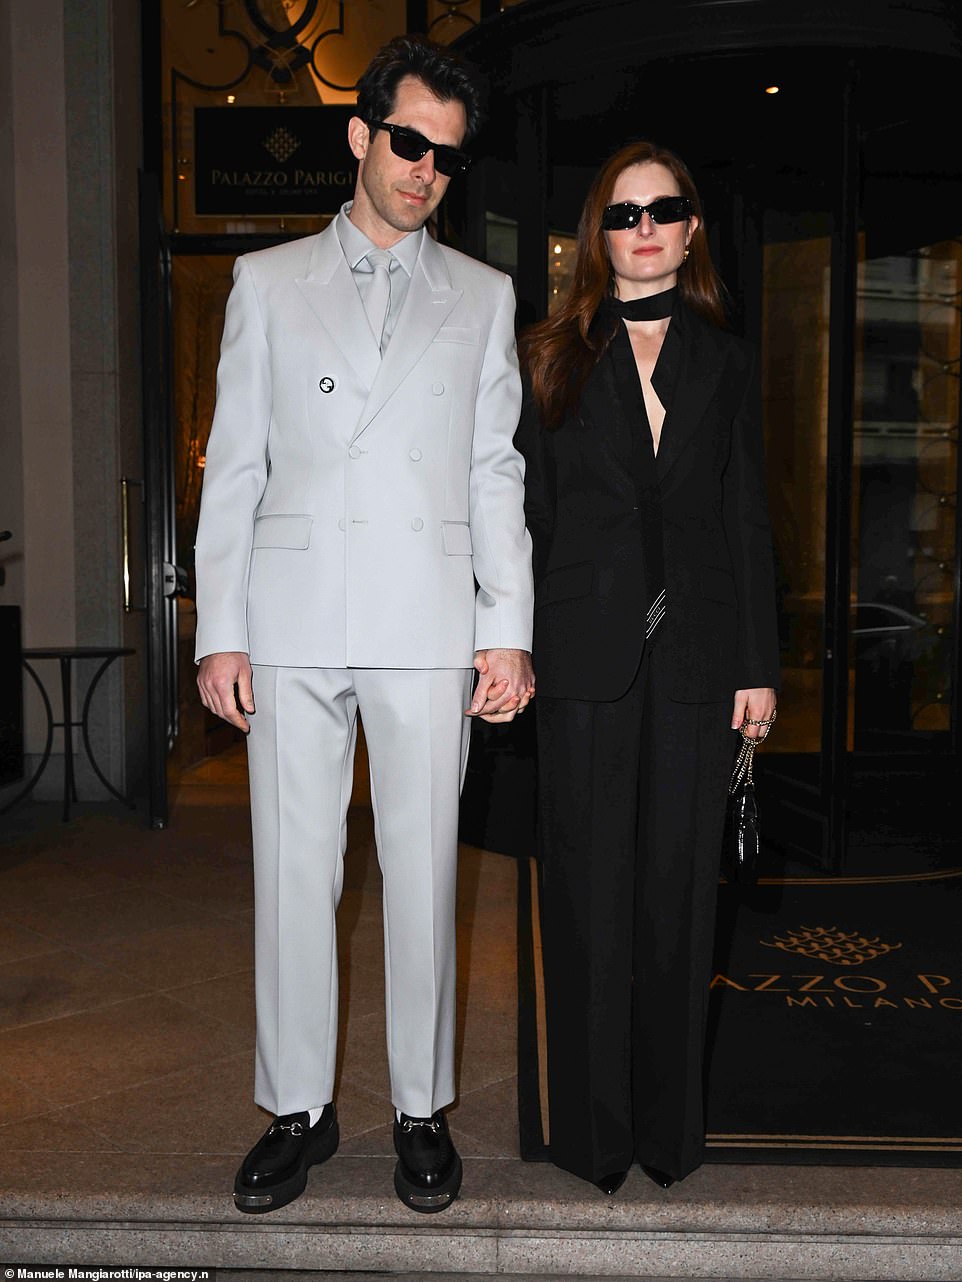 Elsewhere Mark Ronson, 48, and his wife Grace Gummer, 37, posed up a storm in a pair of sophisticated suits as they were snapped hand in hand